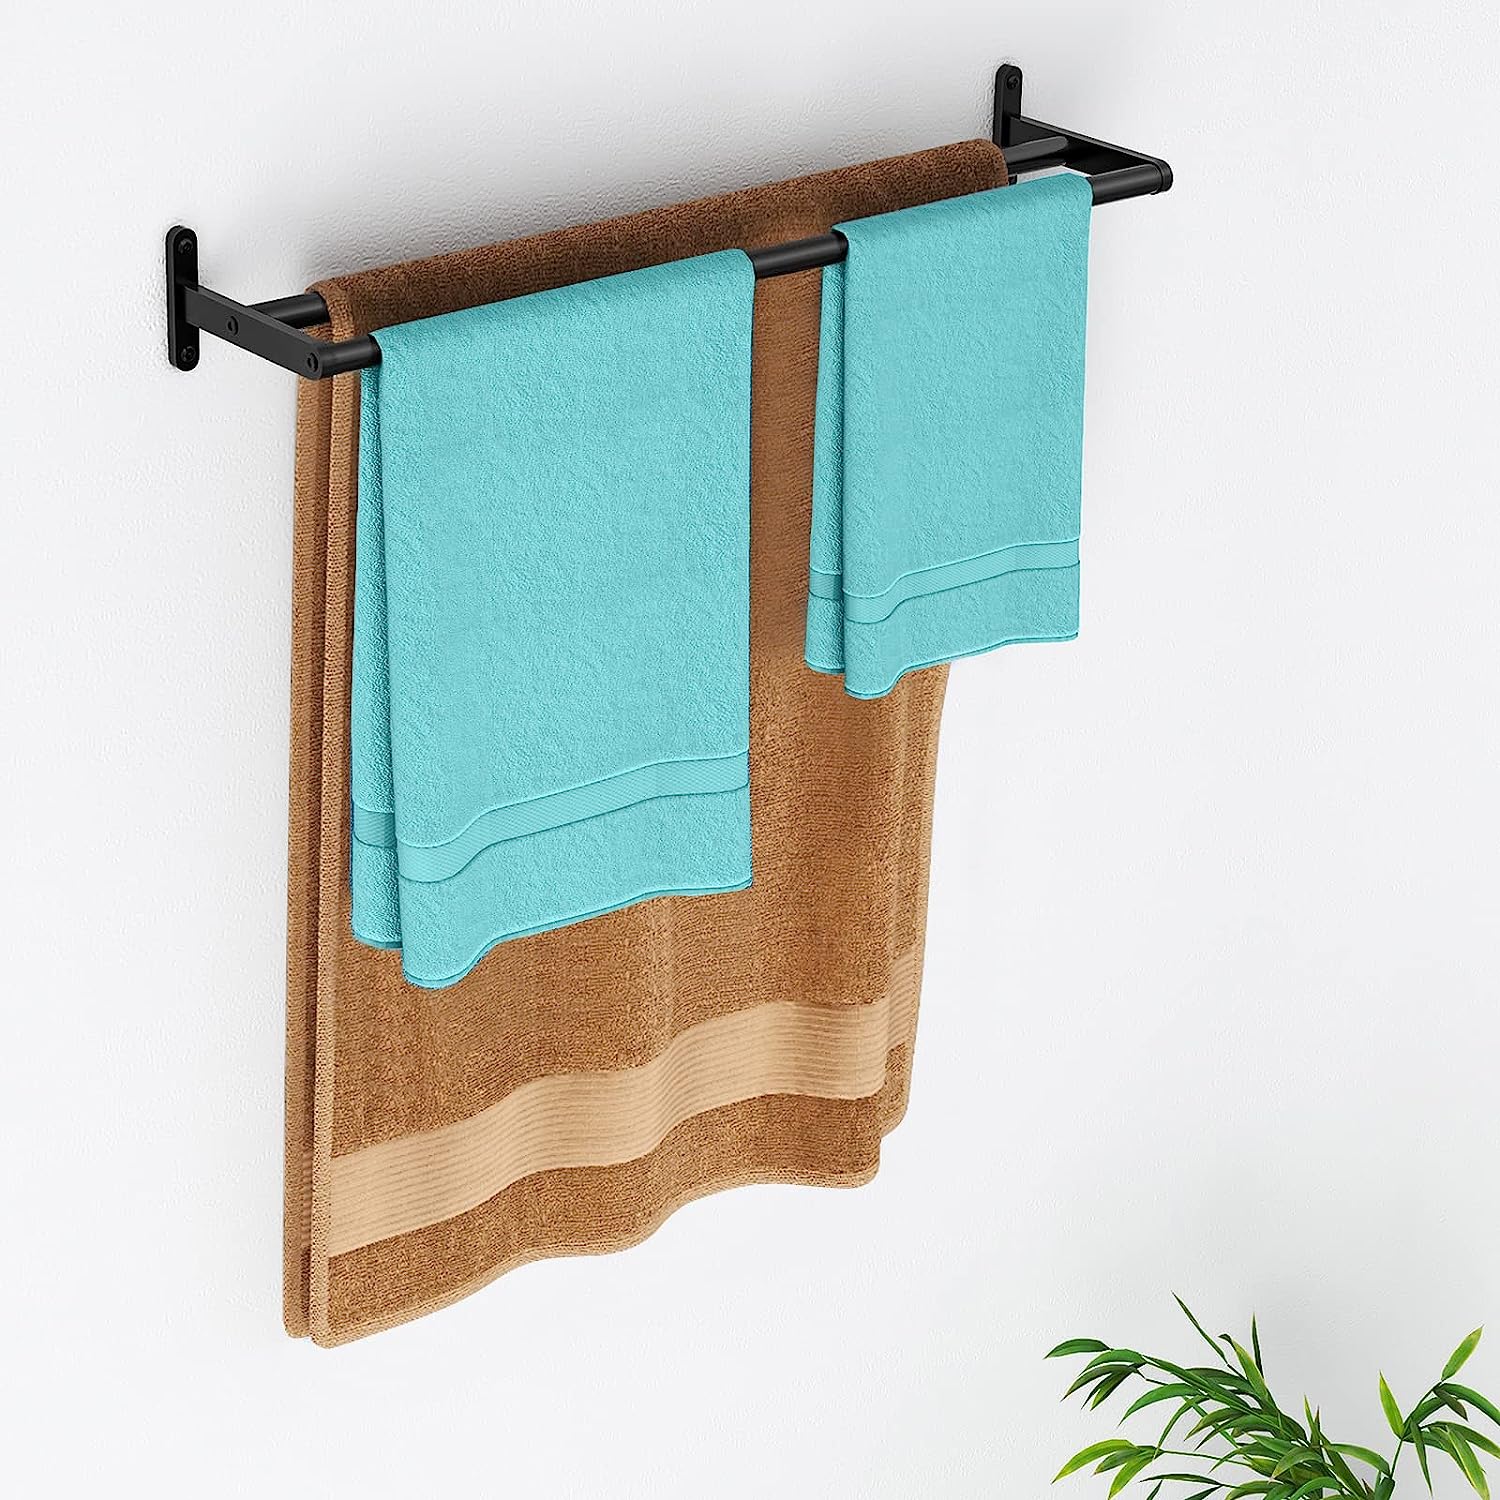 How To Arrange Towels On Double Towel Bar